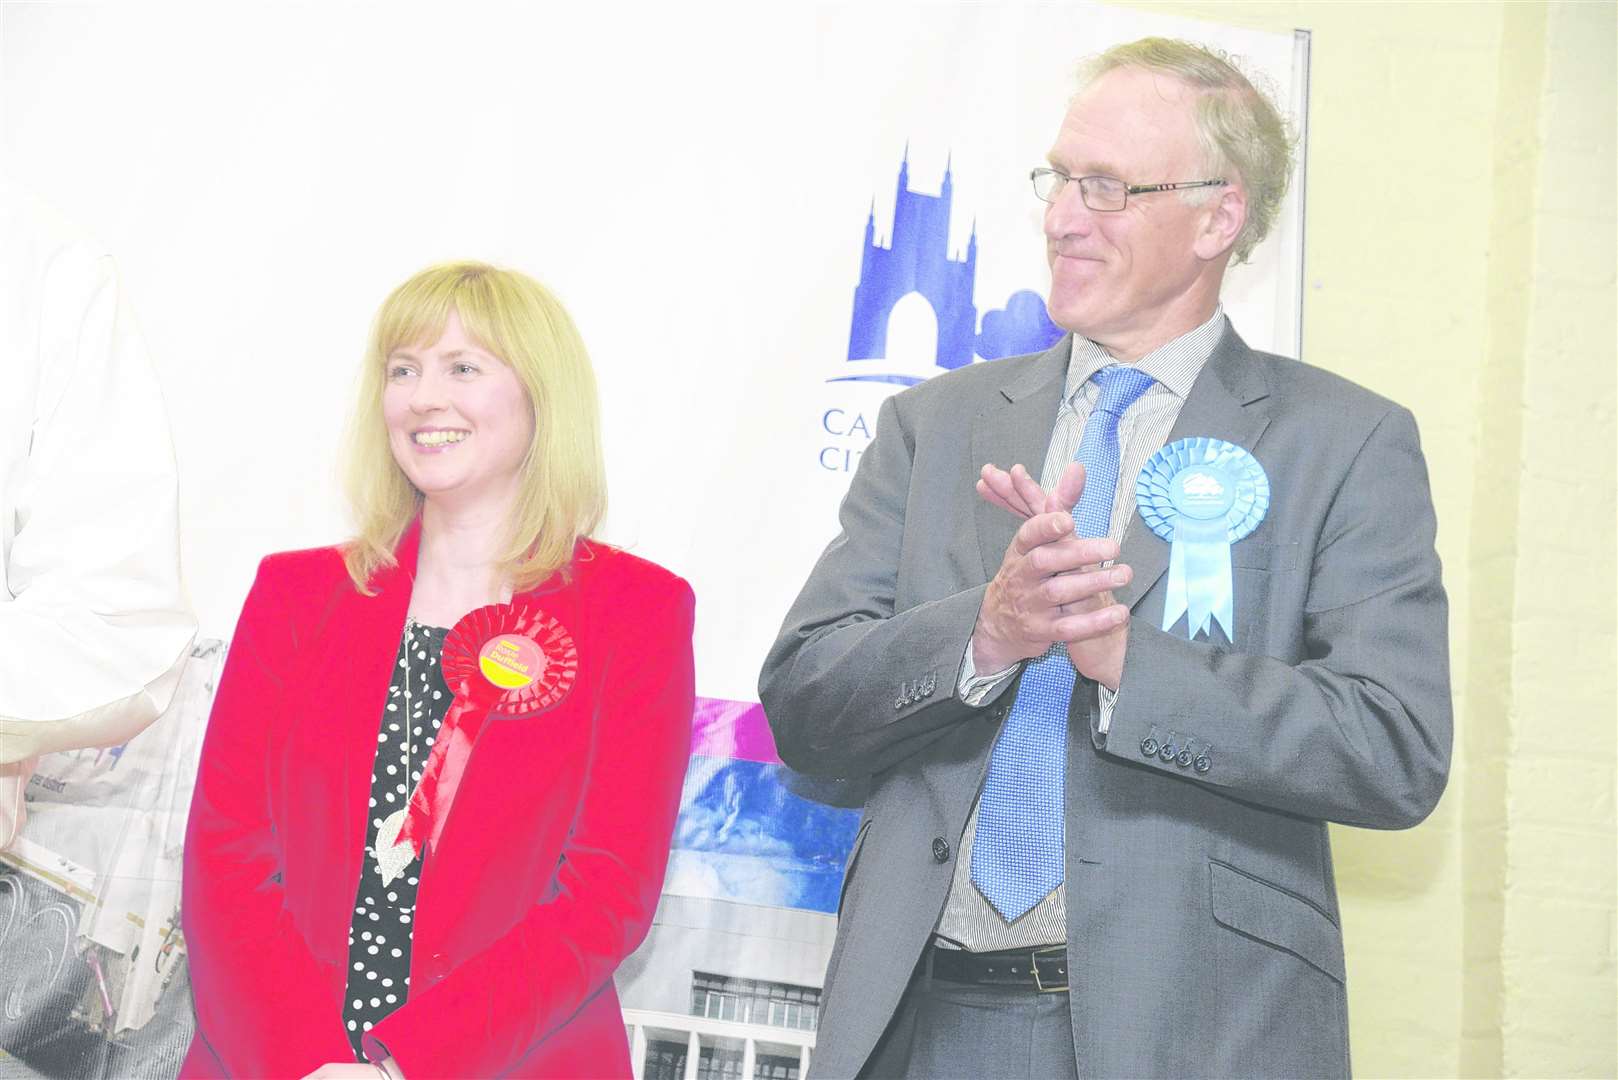 Labour's Rosie Duffield and Sir Julian Brazier at the 2017 election count